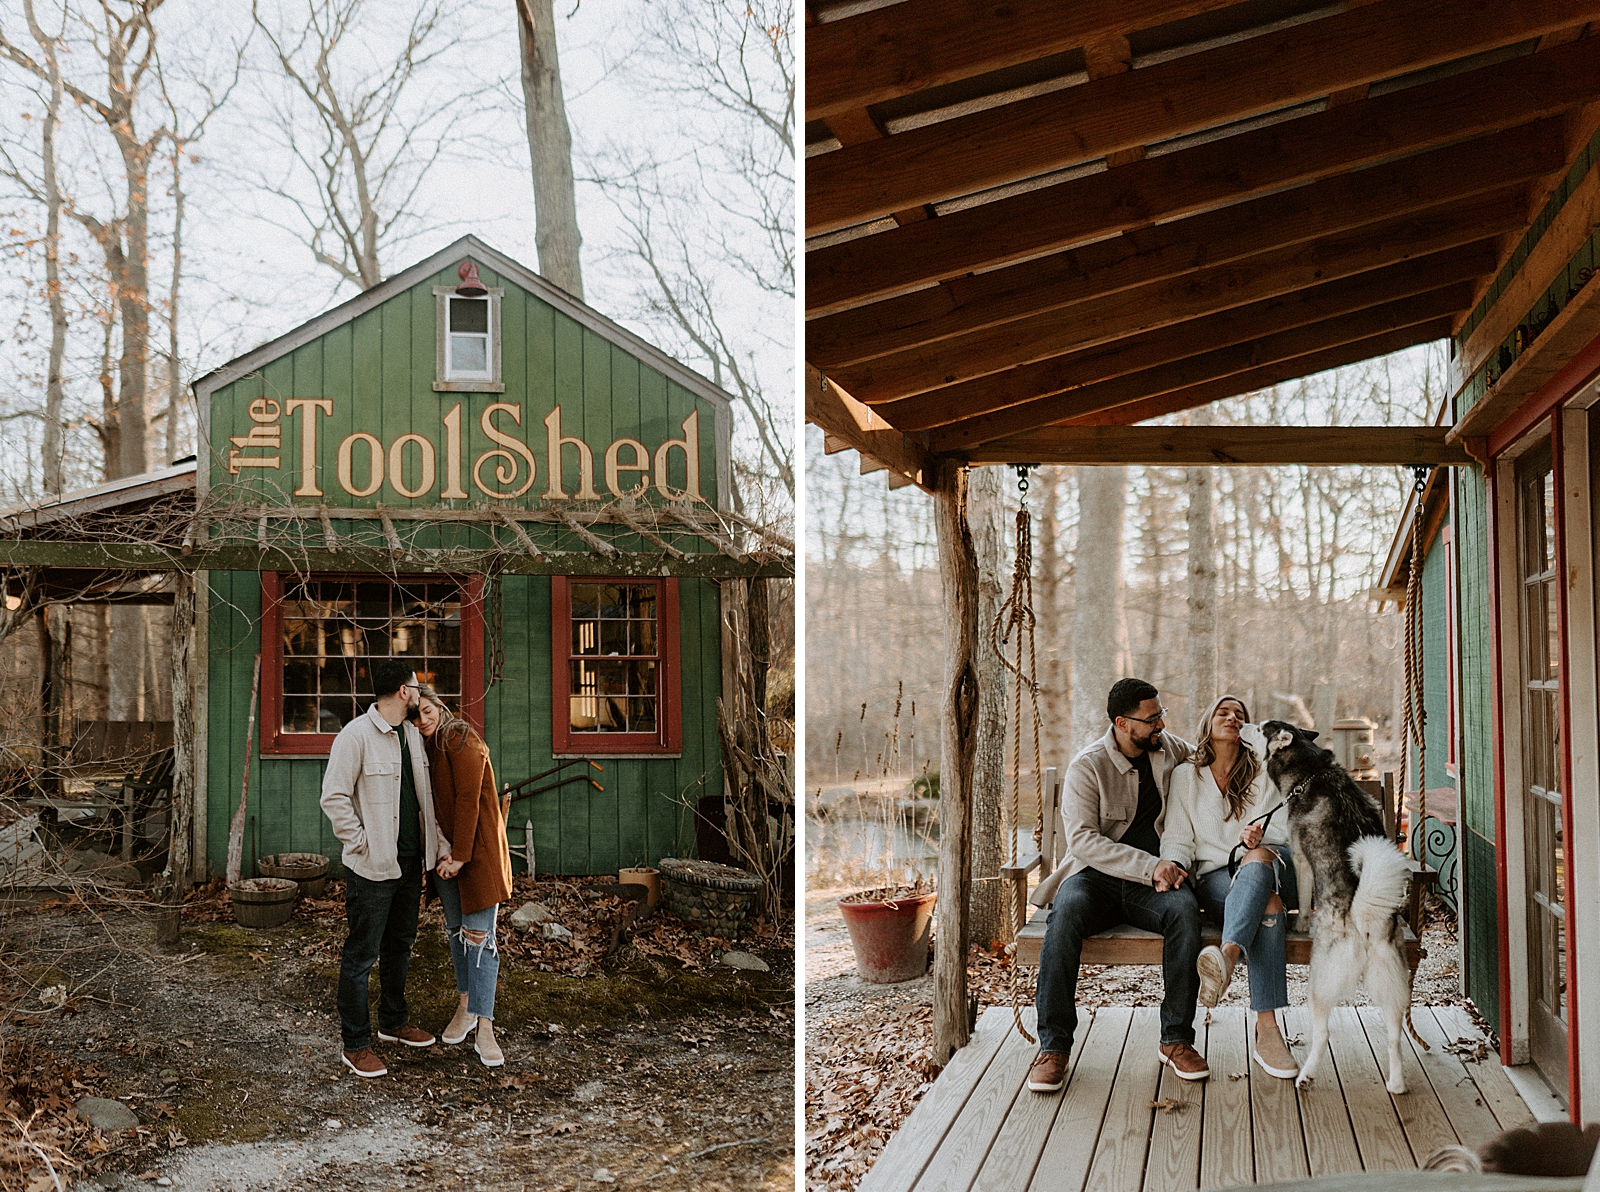 Couple holding each other close in front of The Tool Shed and sitting together